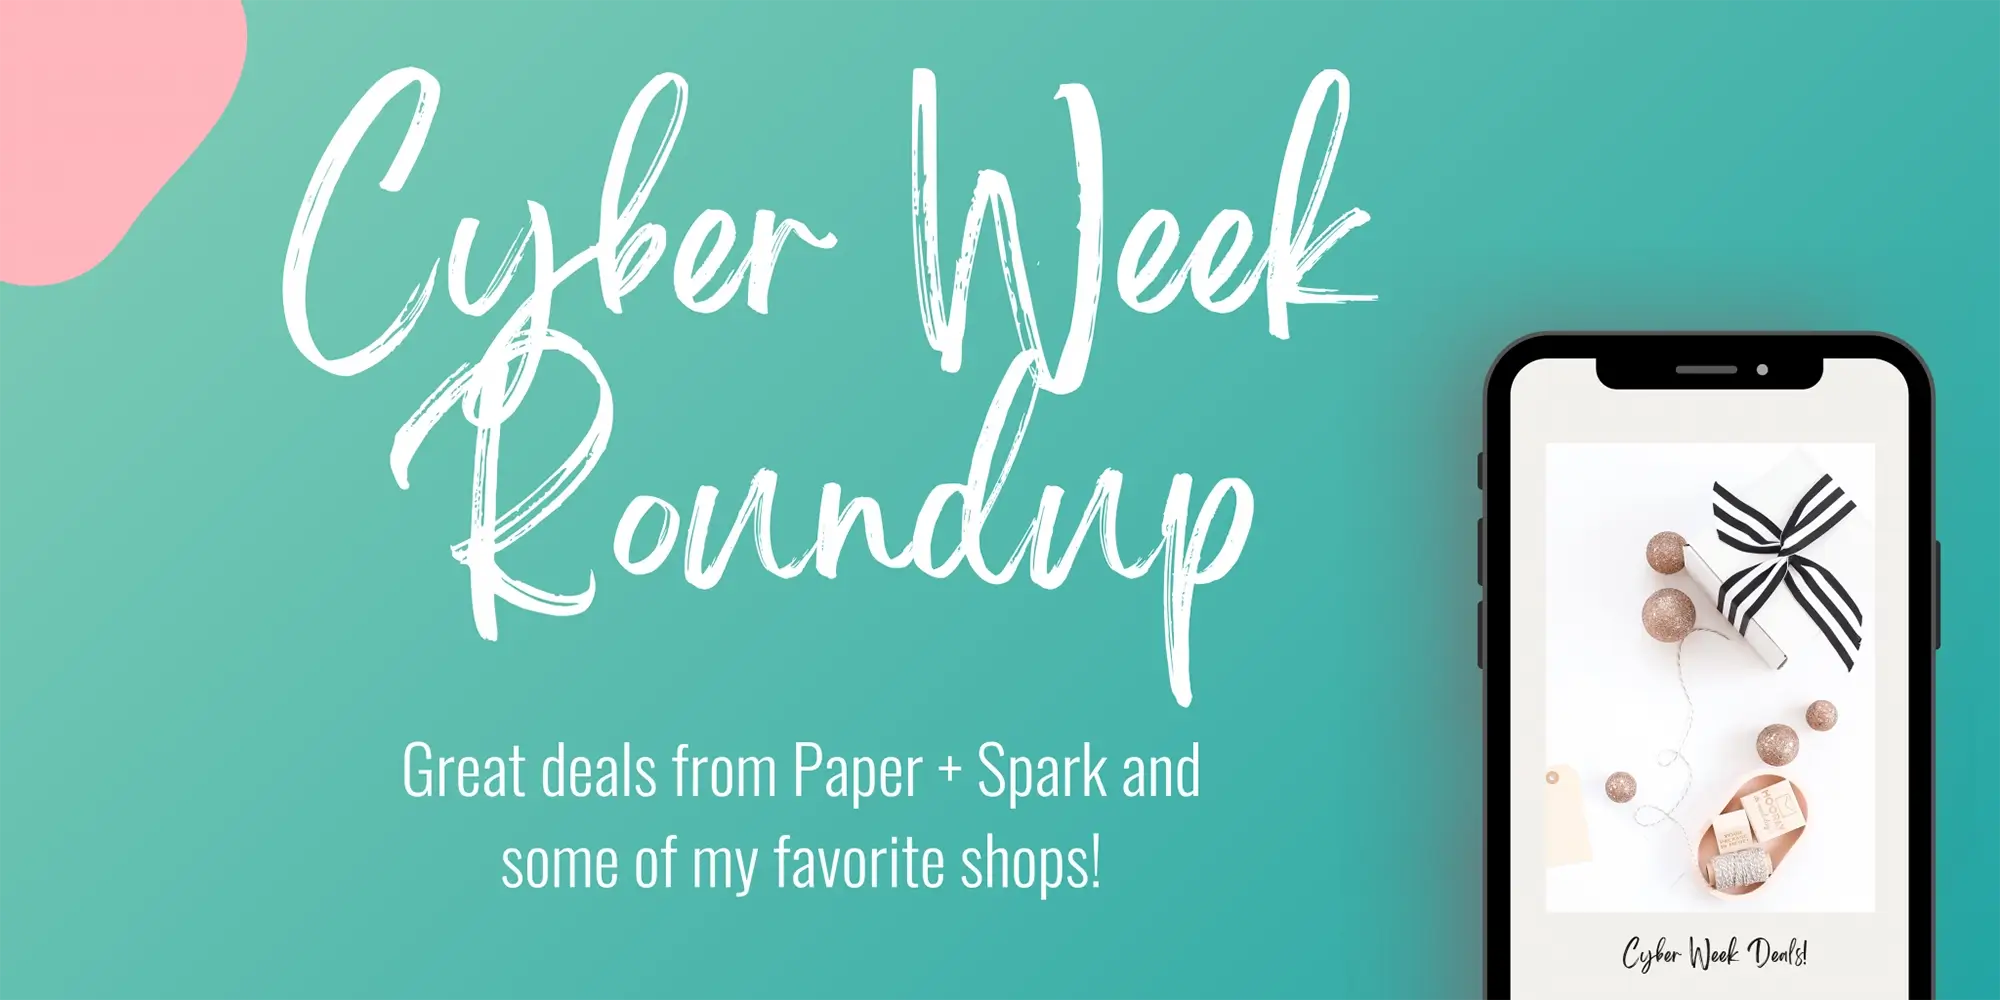 Cyber Week Roundup of deals with Paper + Spark